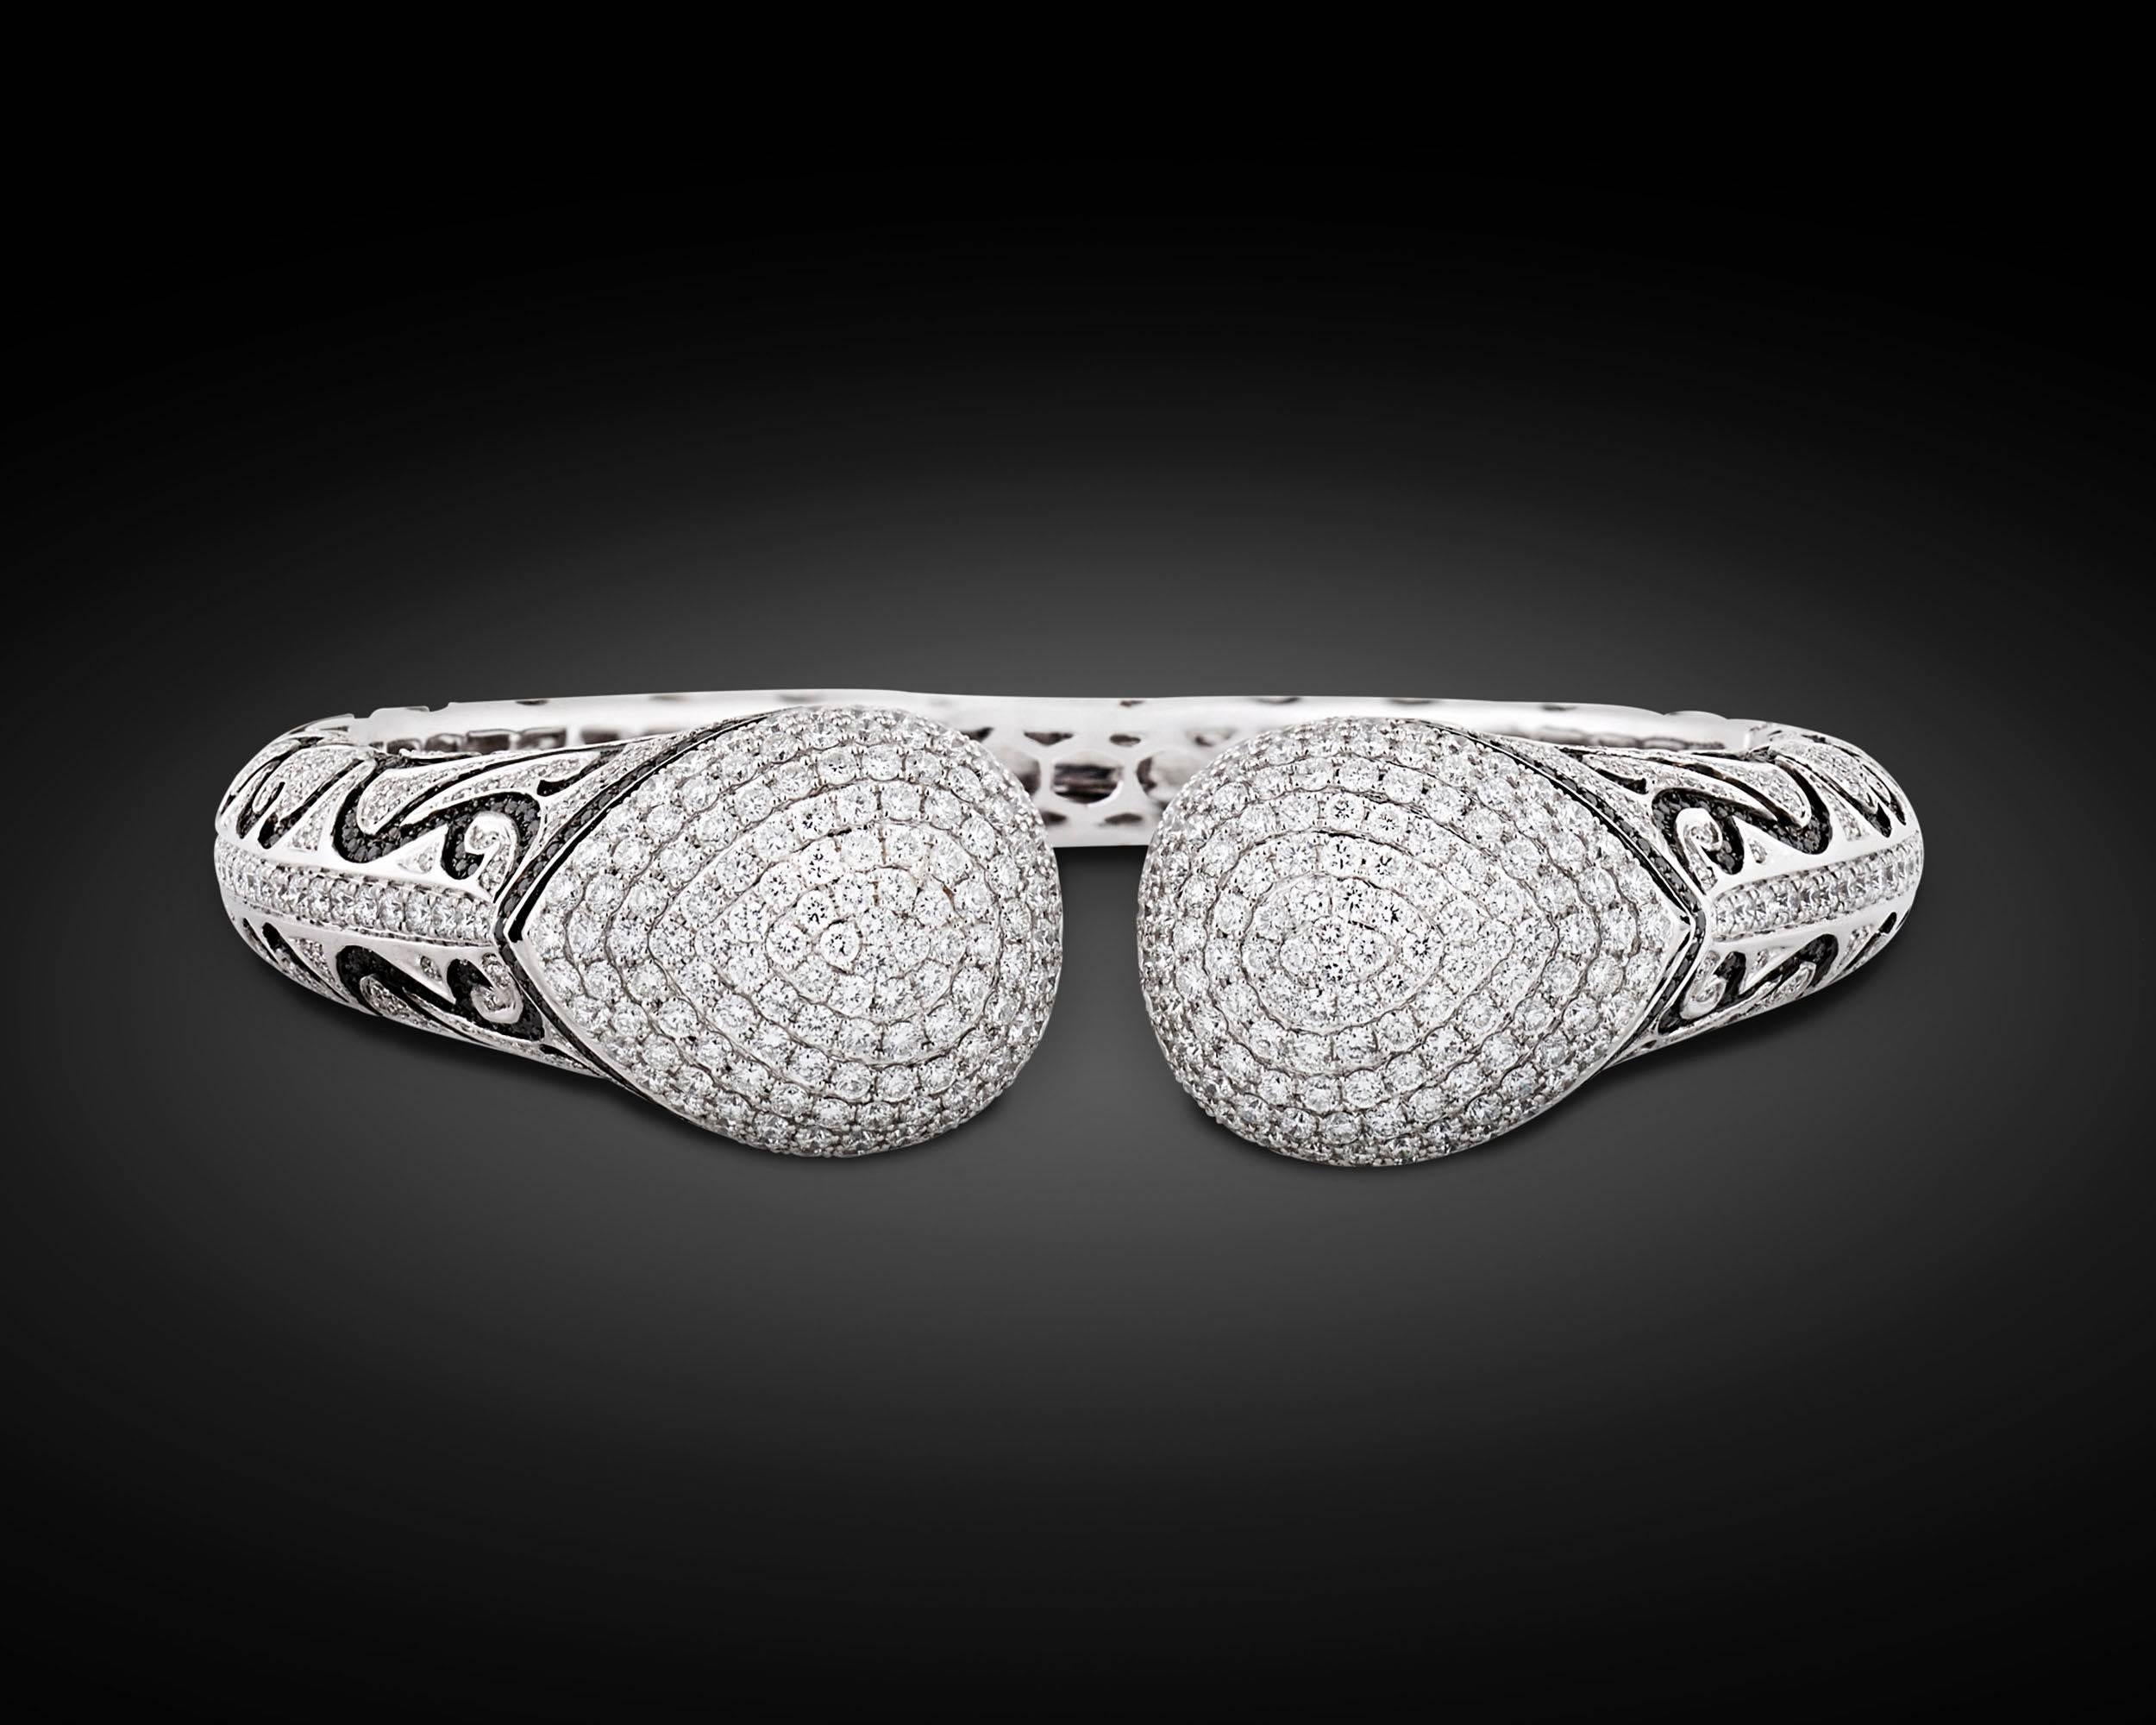 Black diamonds weighing 3.00 carats swirl in a sea of 6.59 carats of shimmering white diamonds in this outstanding cuff bracelet. The jewels, totaling 9.59 carats, are set within this brilliantly designed 18K white gold creation that is intended to